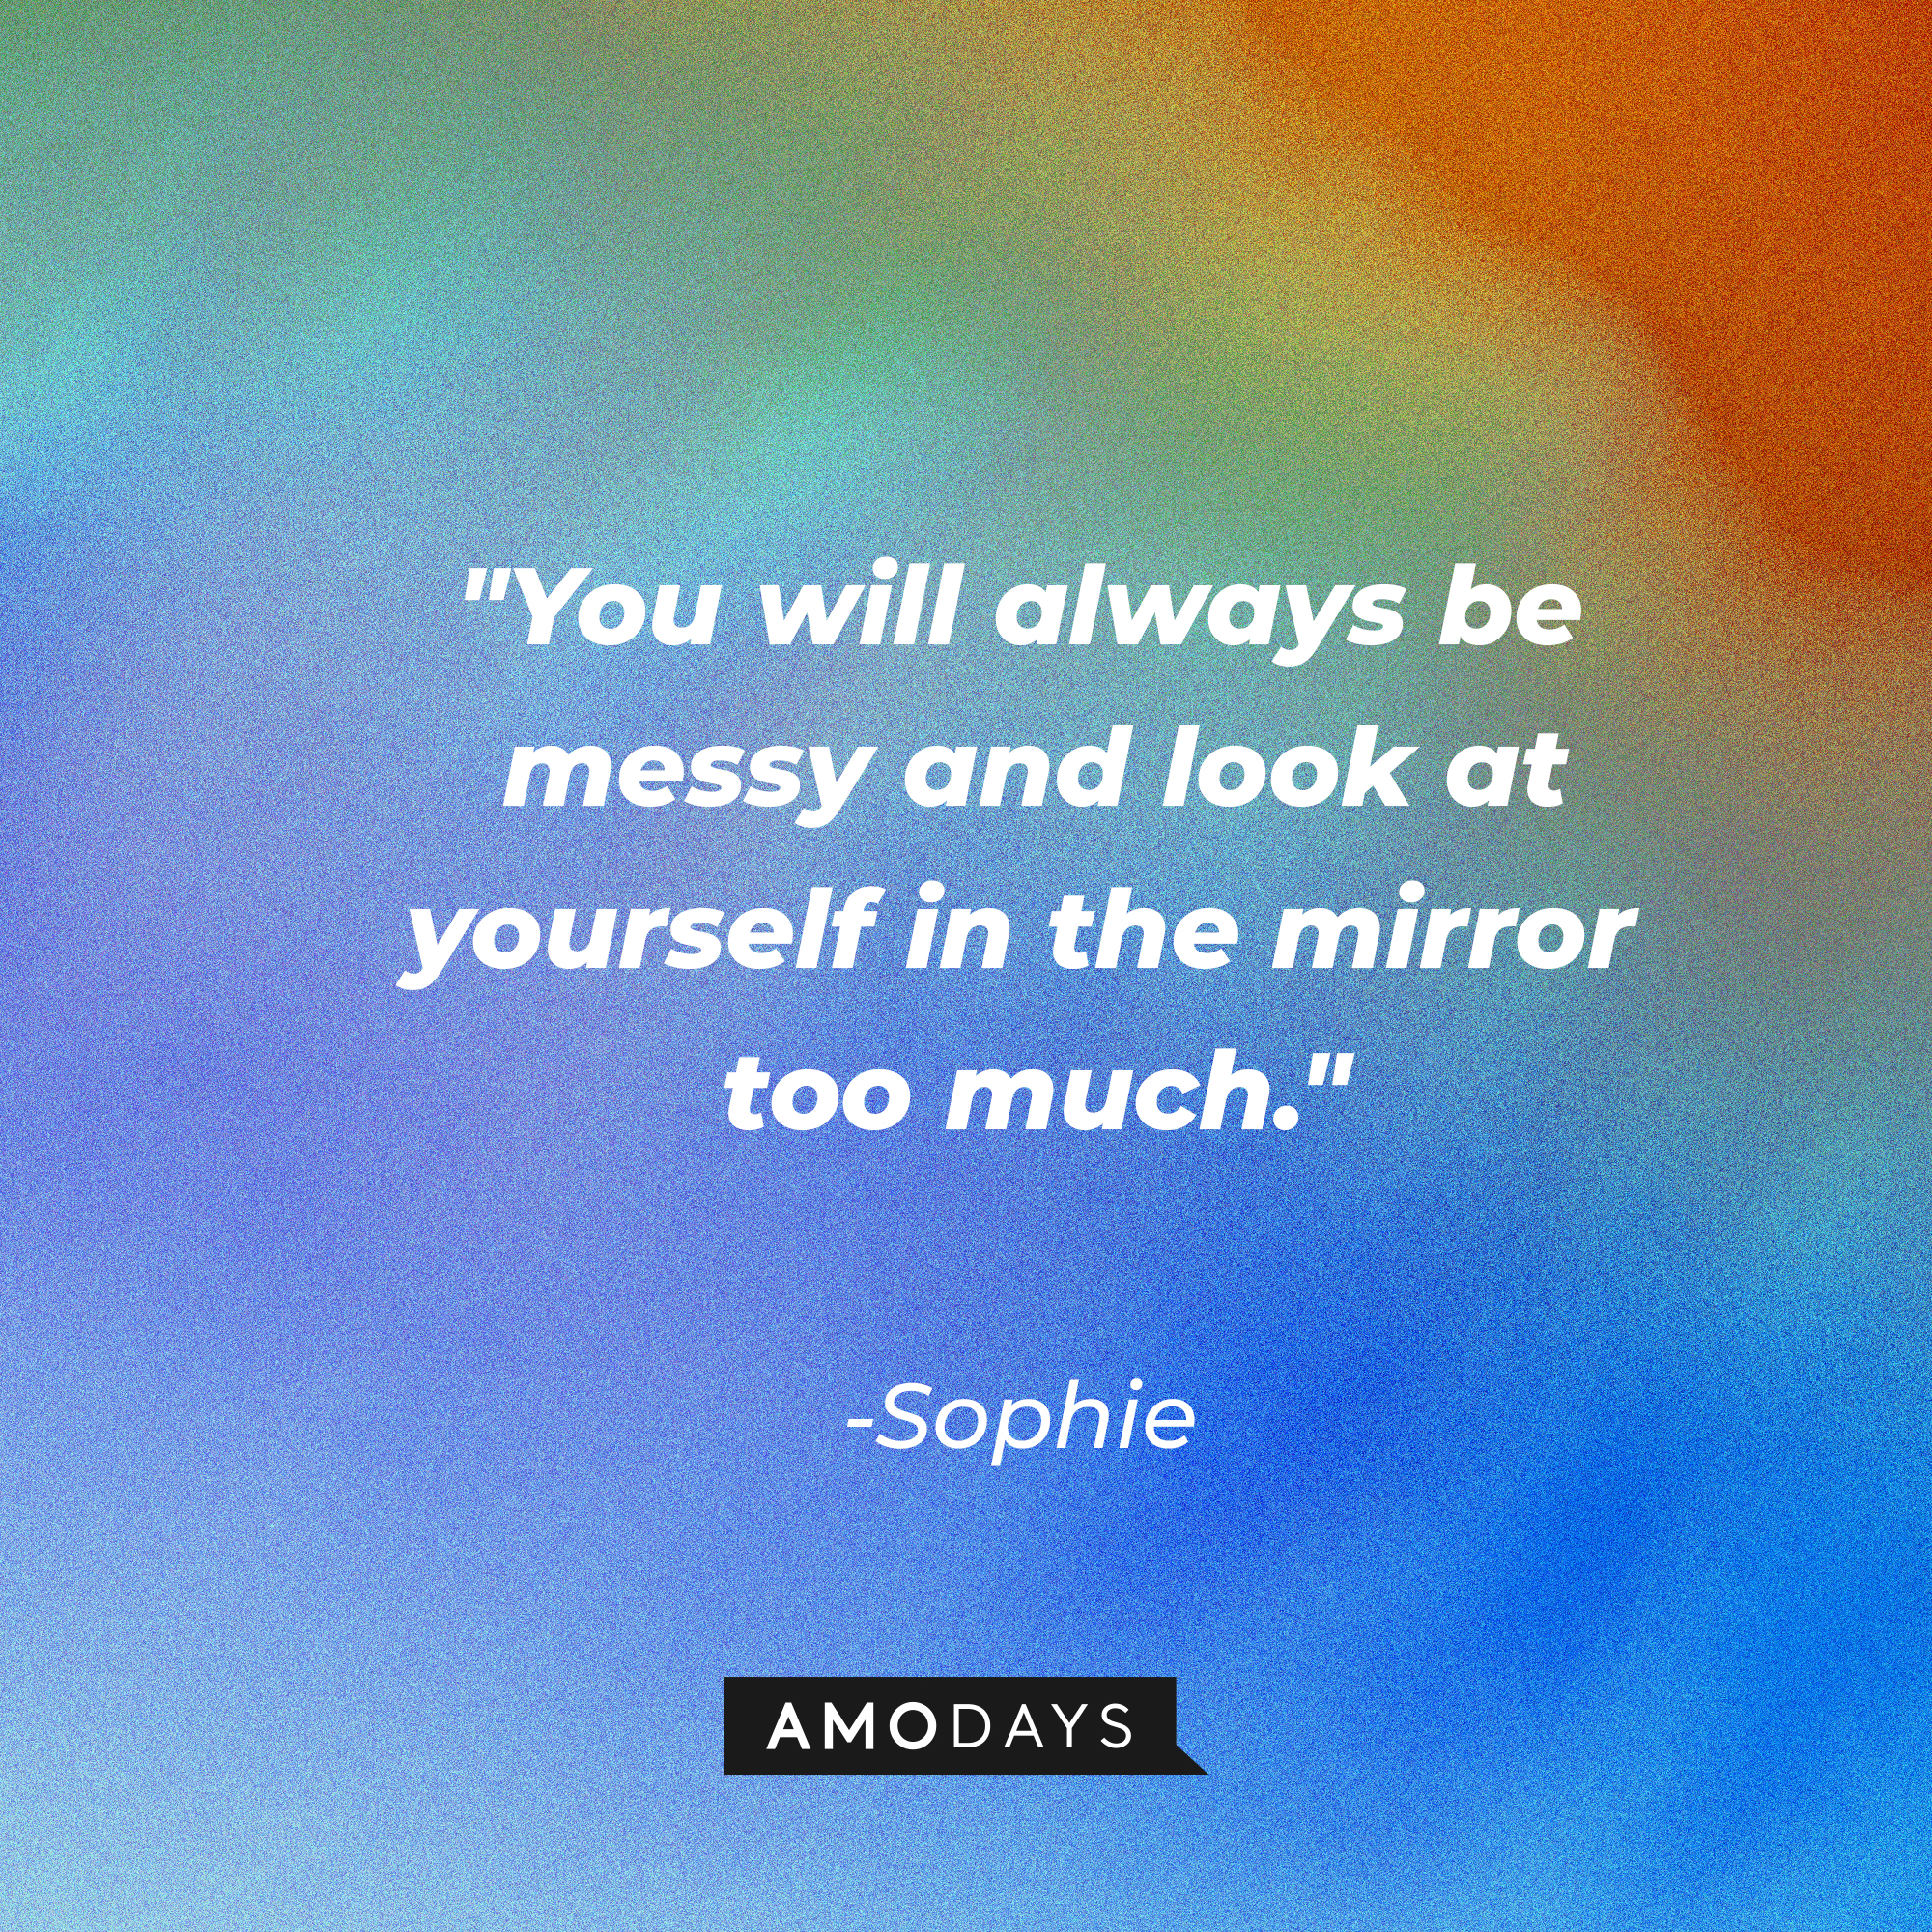 Sophie's quote: "You will always be messy and look at yourself in the mirror too much." | Source: AmoDays